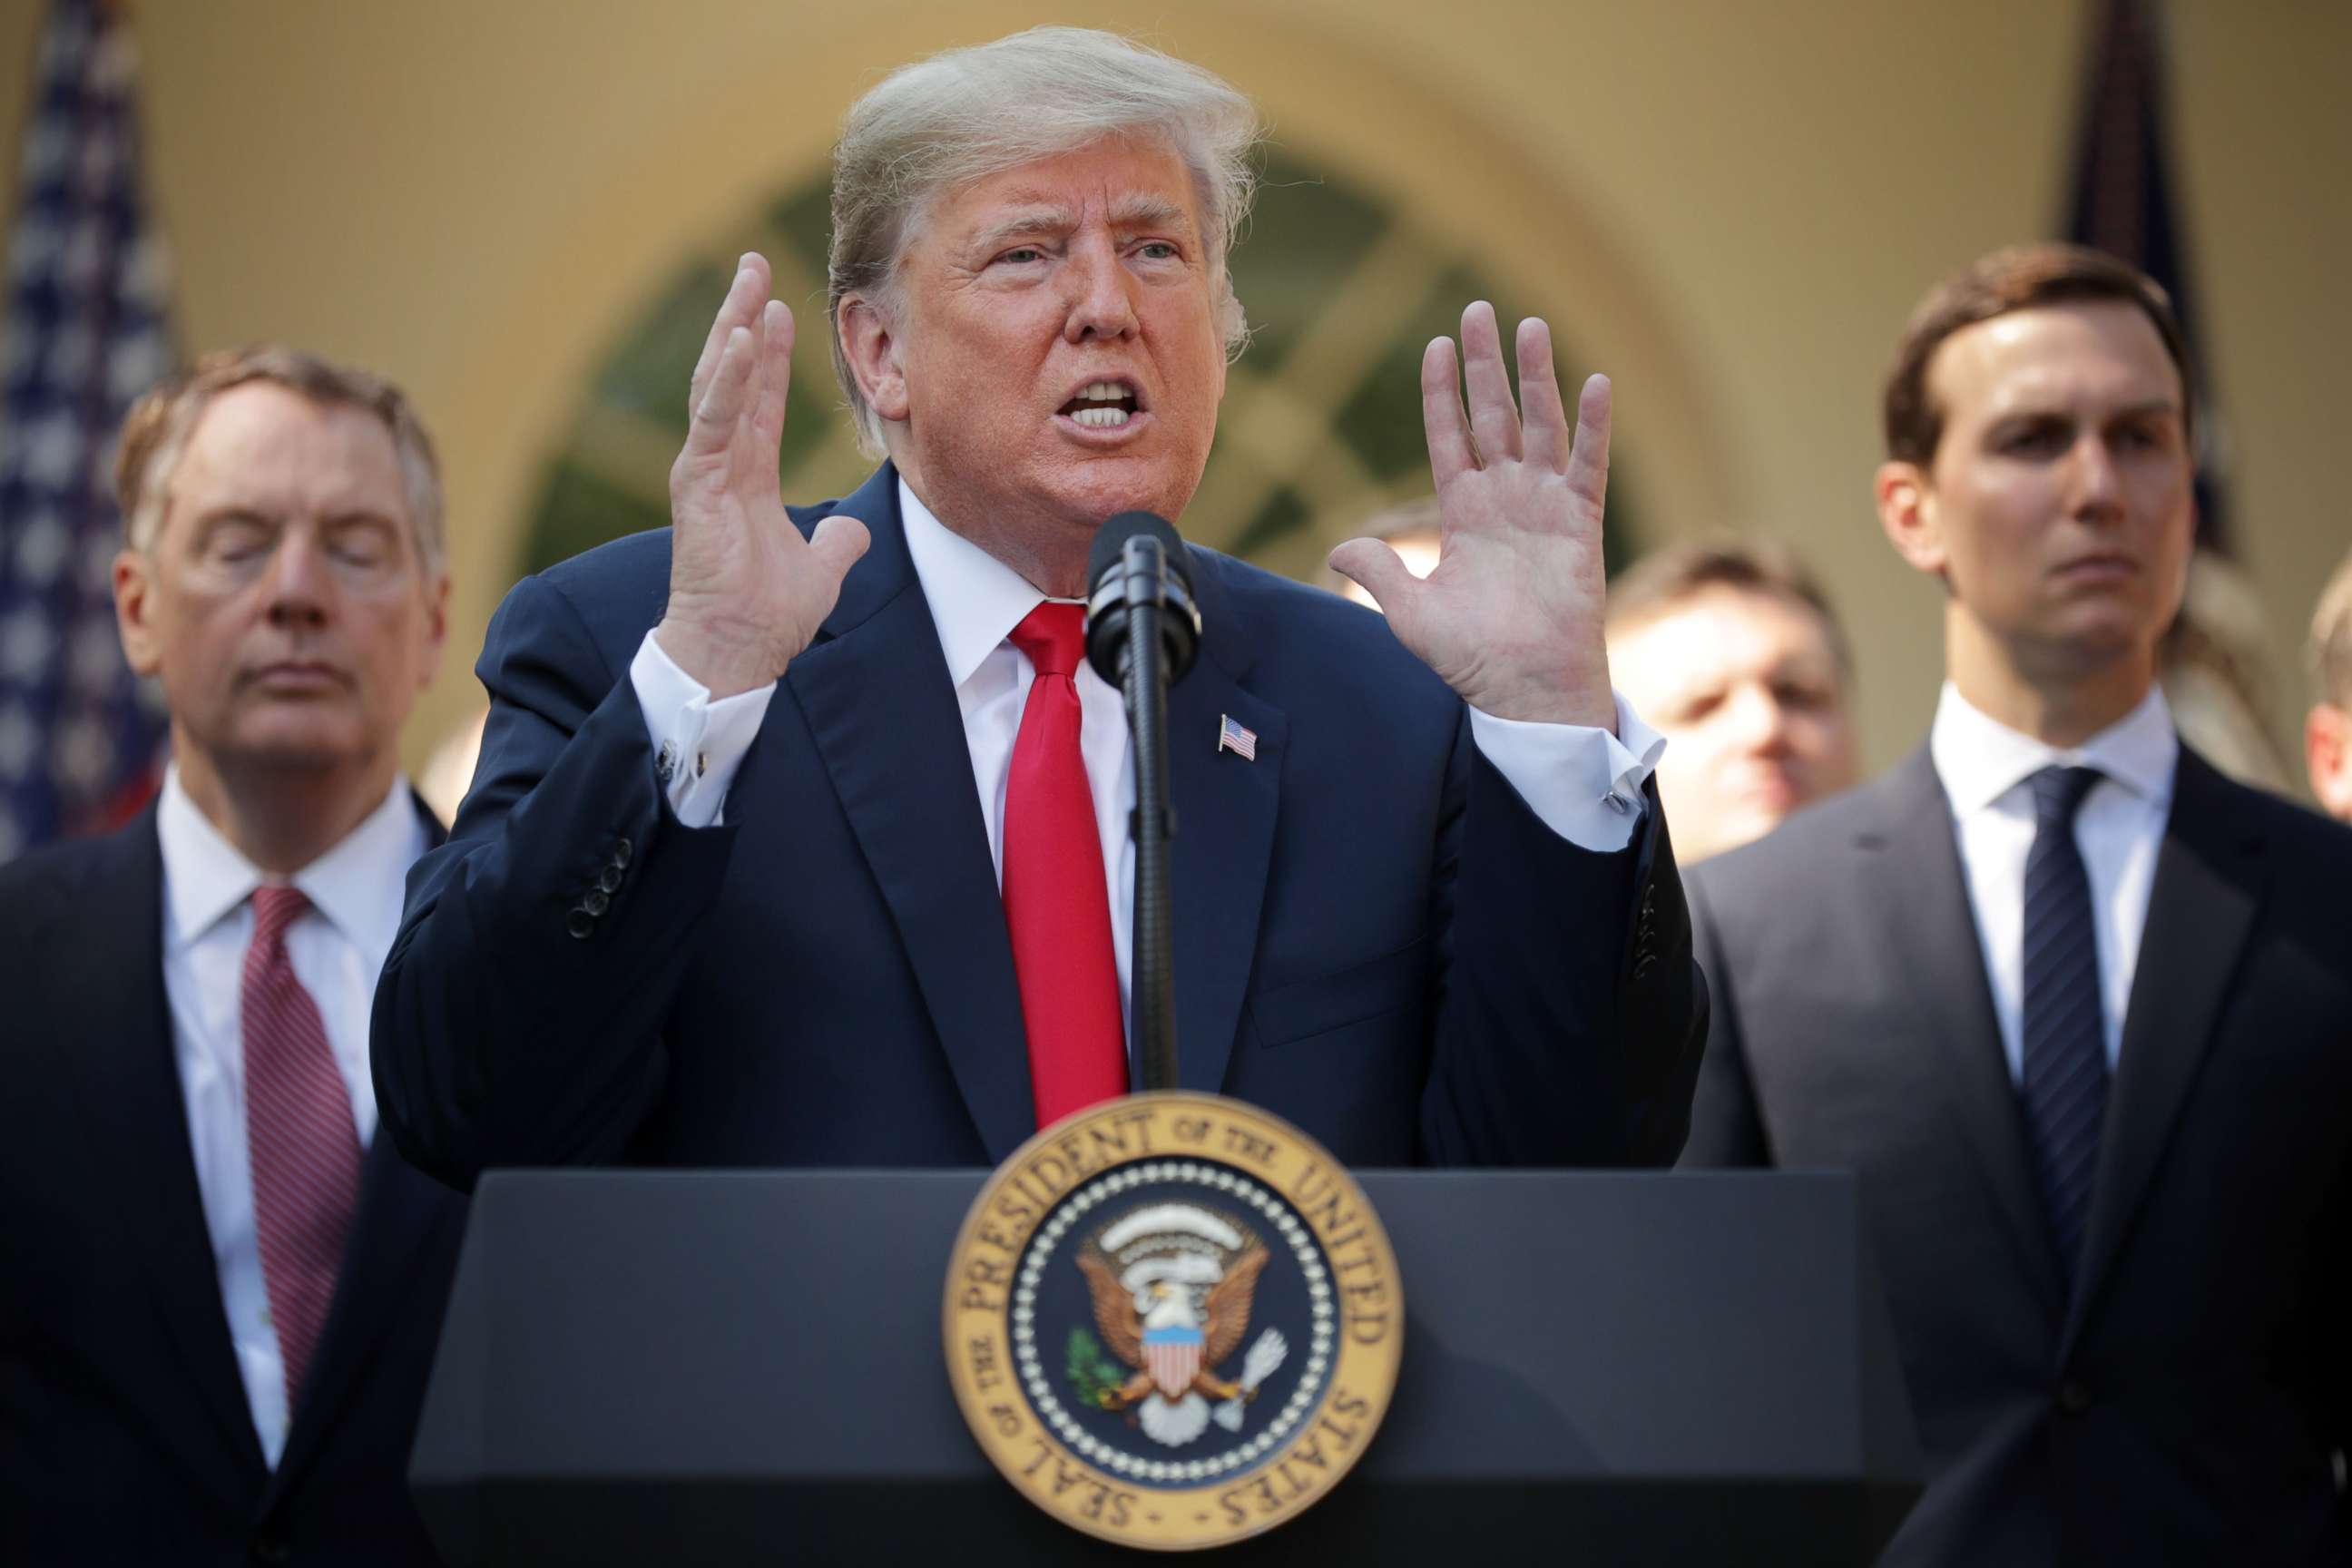 PHOTO: President Donald Trump speaks during a press conference to discuss a revised U.S. trade agreement with Mexico and Canada in the Rose Garden of the White House, Oct. 1, 2018, in Washington, D.C.